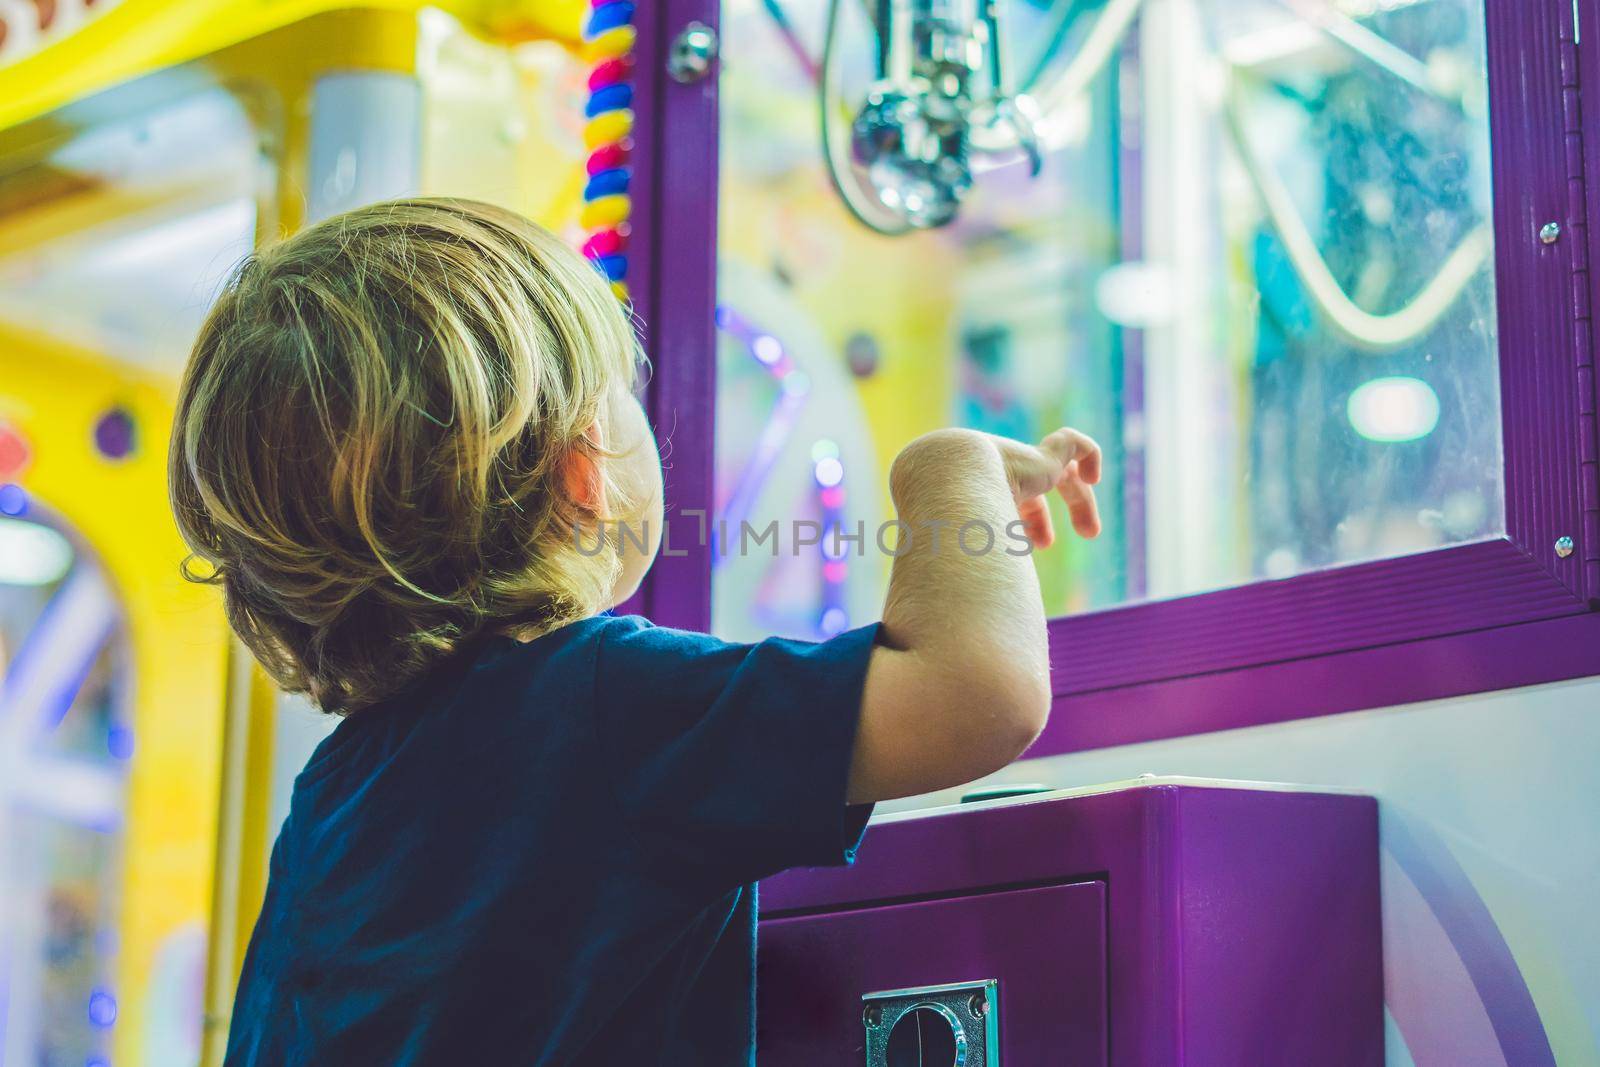 The boy plays with the vending machine.